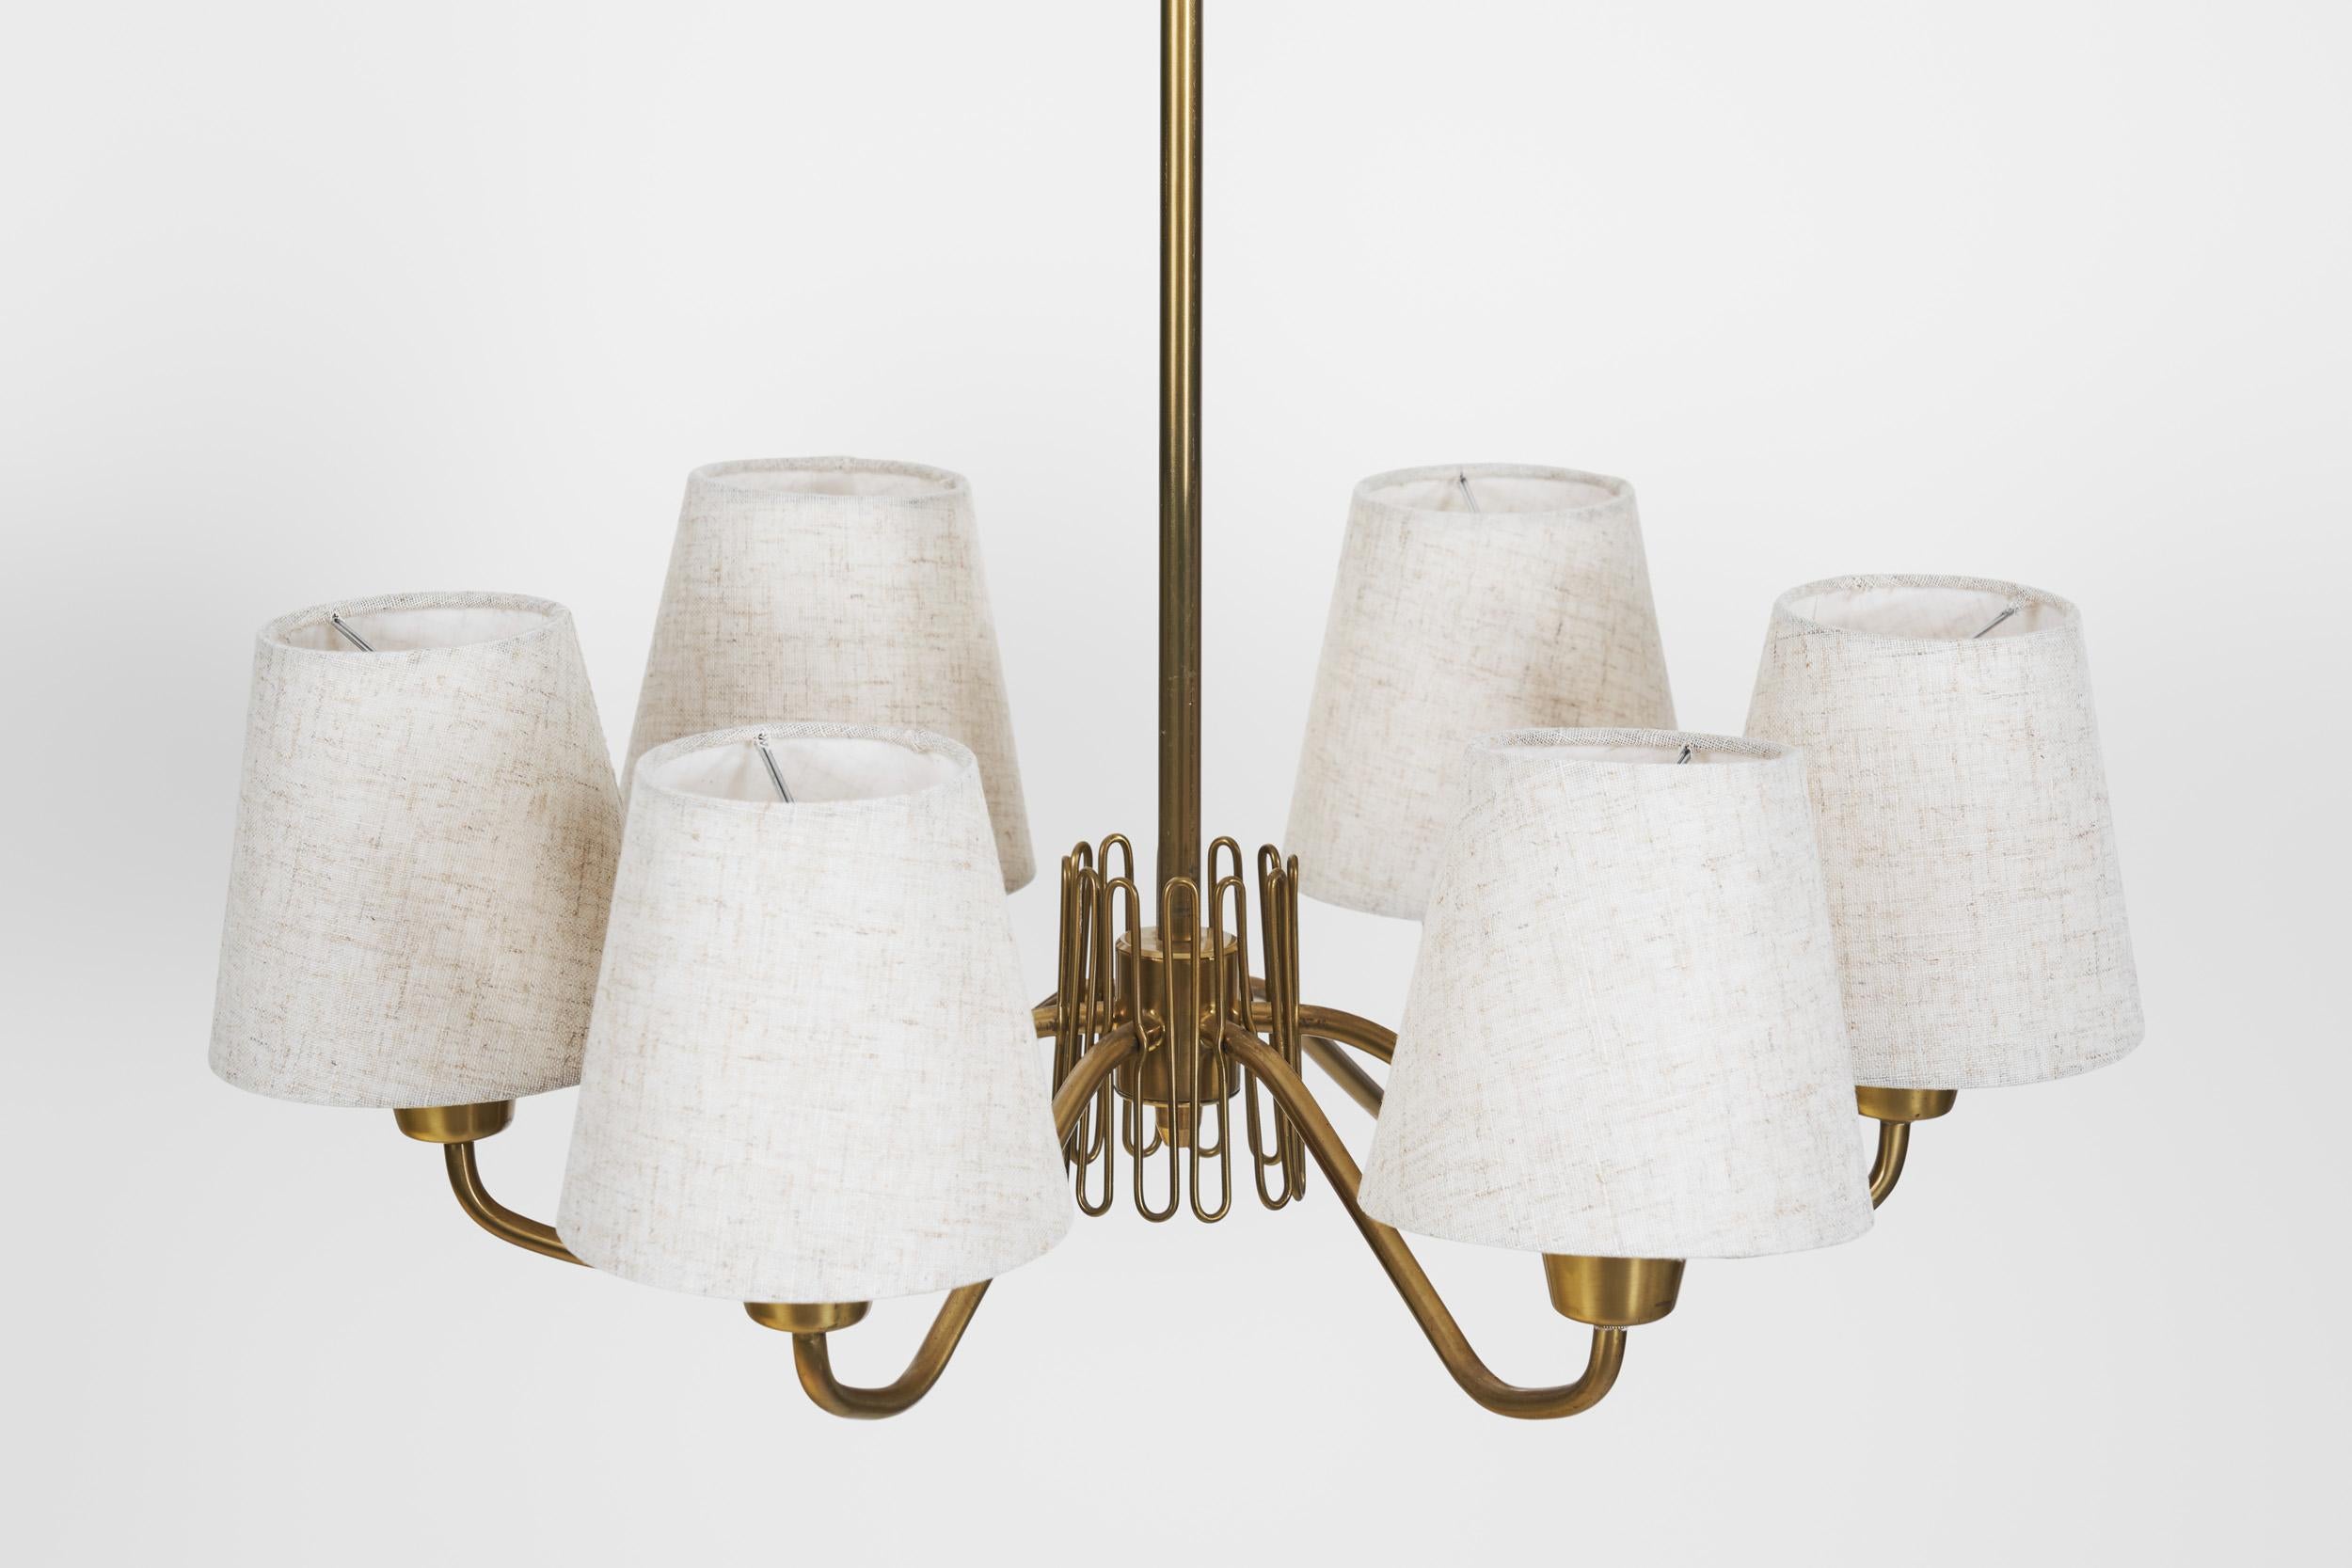 Swedish Modern Brass Ceiling Light with Fabric Shades, Sweden Mid-20th Century For Sale 6